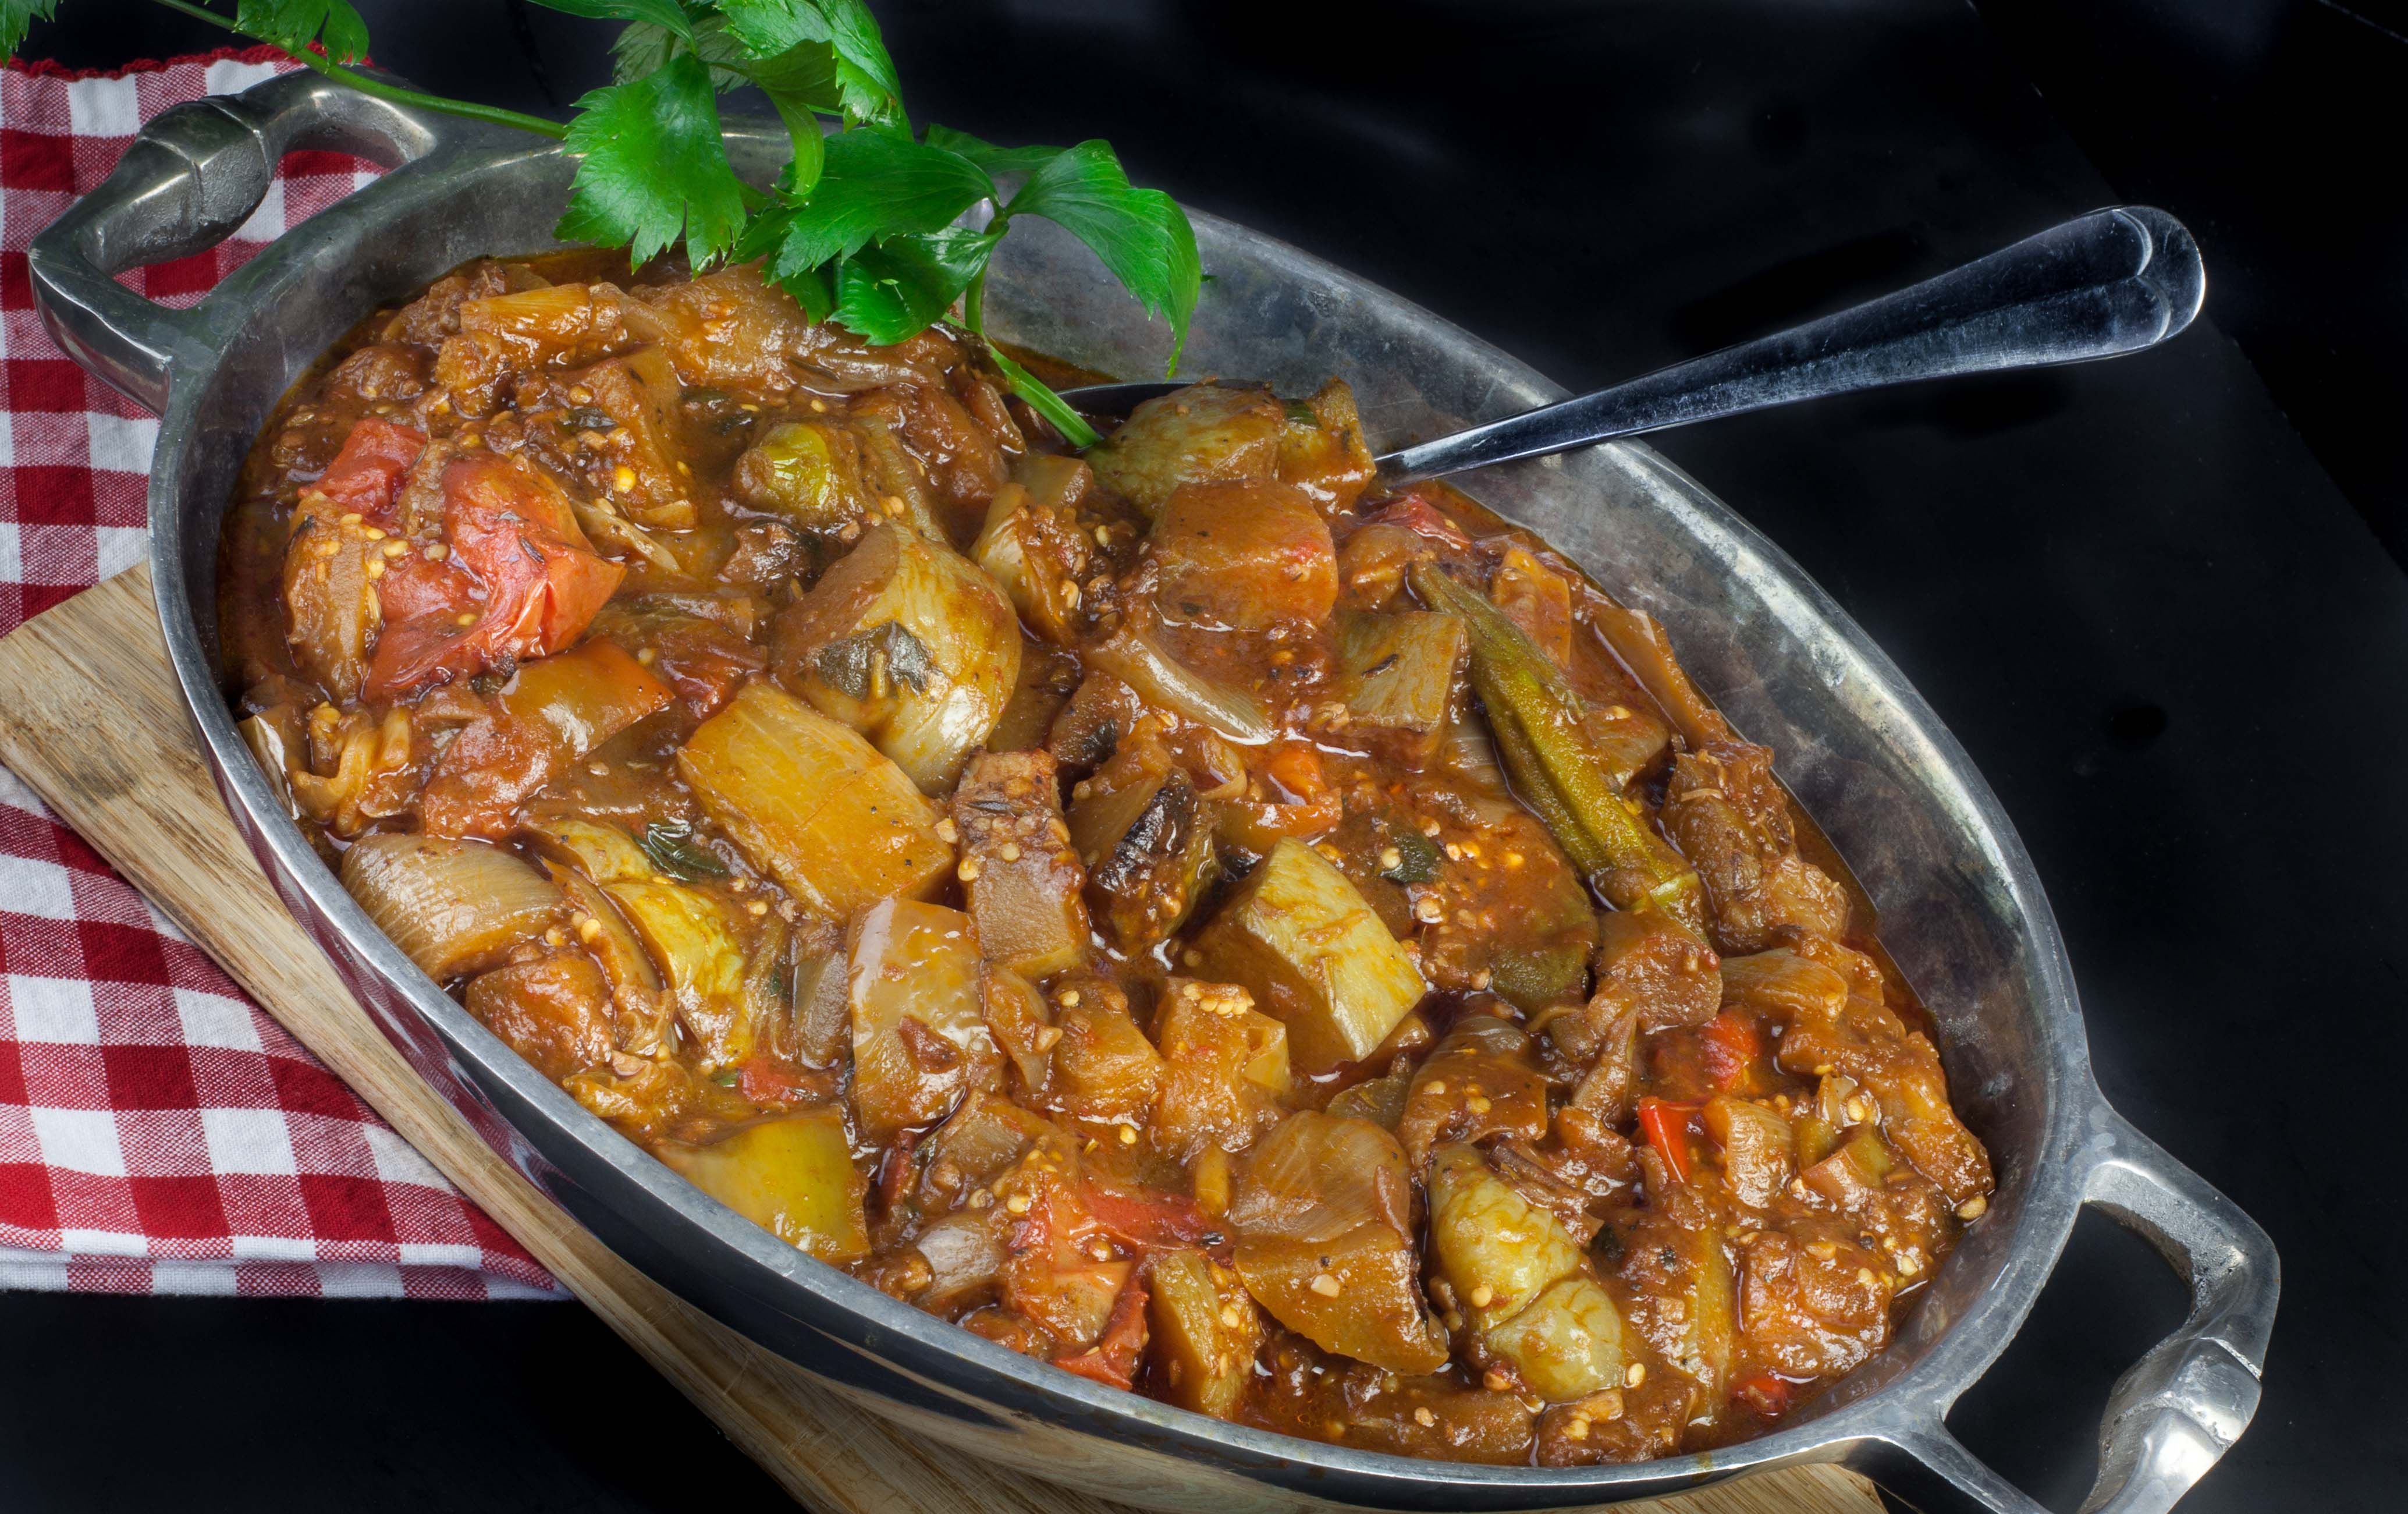 Southern Ratatouille features home-grown vegetables and herbs.